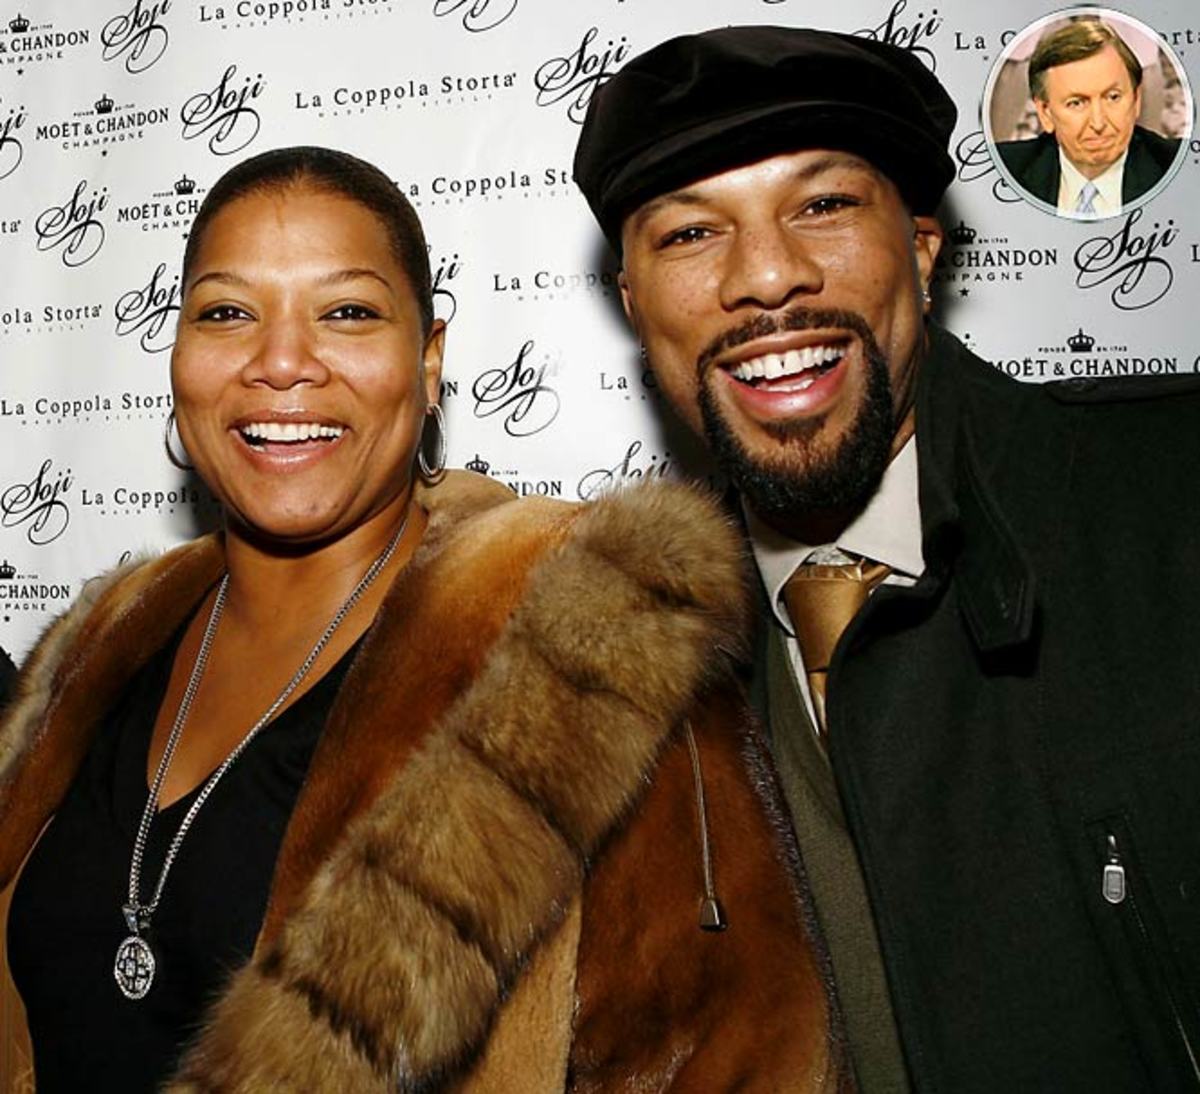 Queen Latifah, Common and Rod Thorn